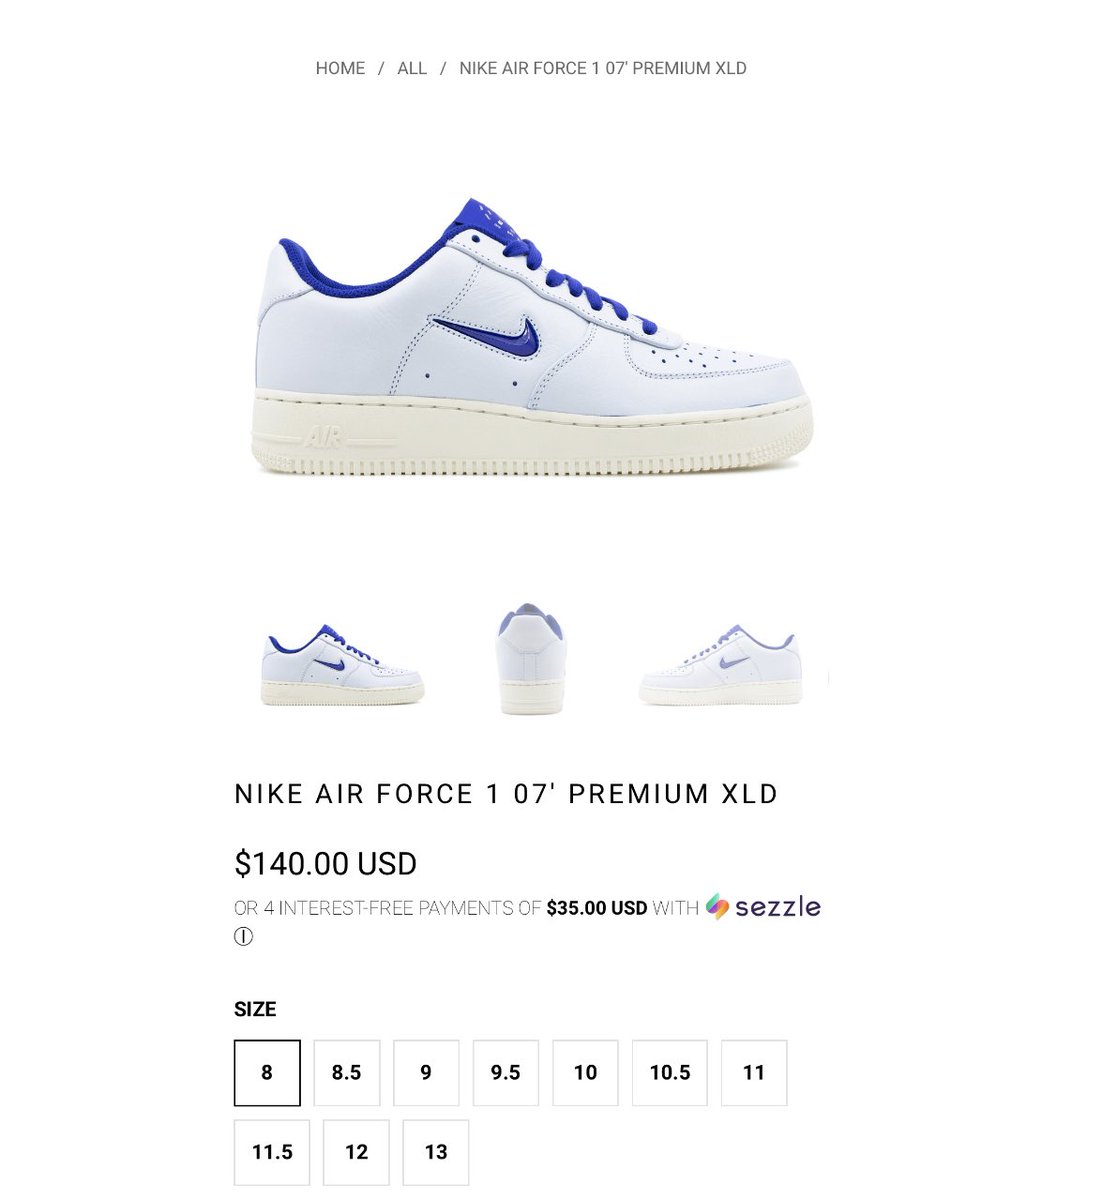 Nike Air Force 1 Premium ‘Home and Away’ bit.ly/2z8DosU #AD